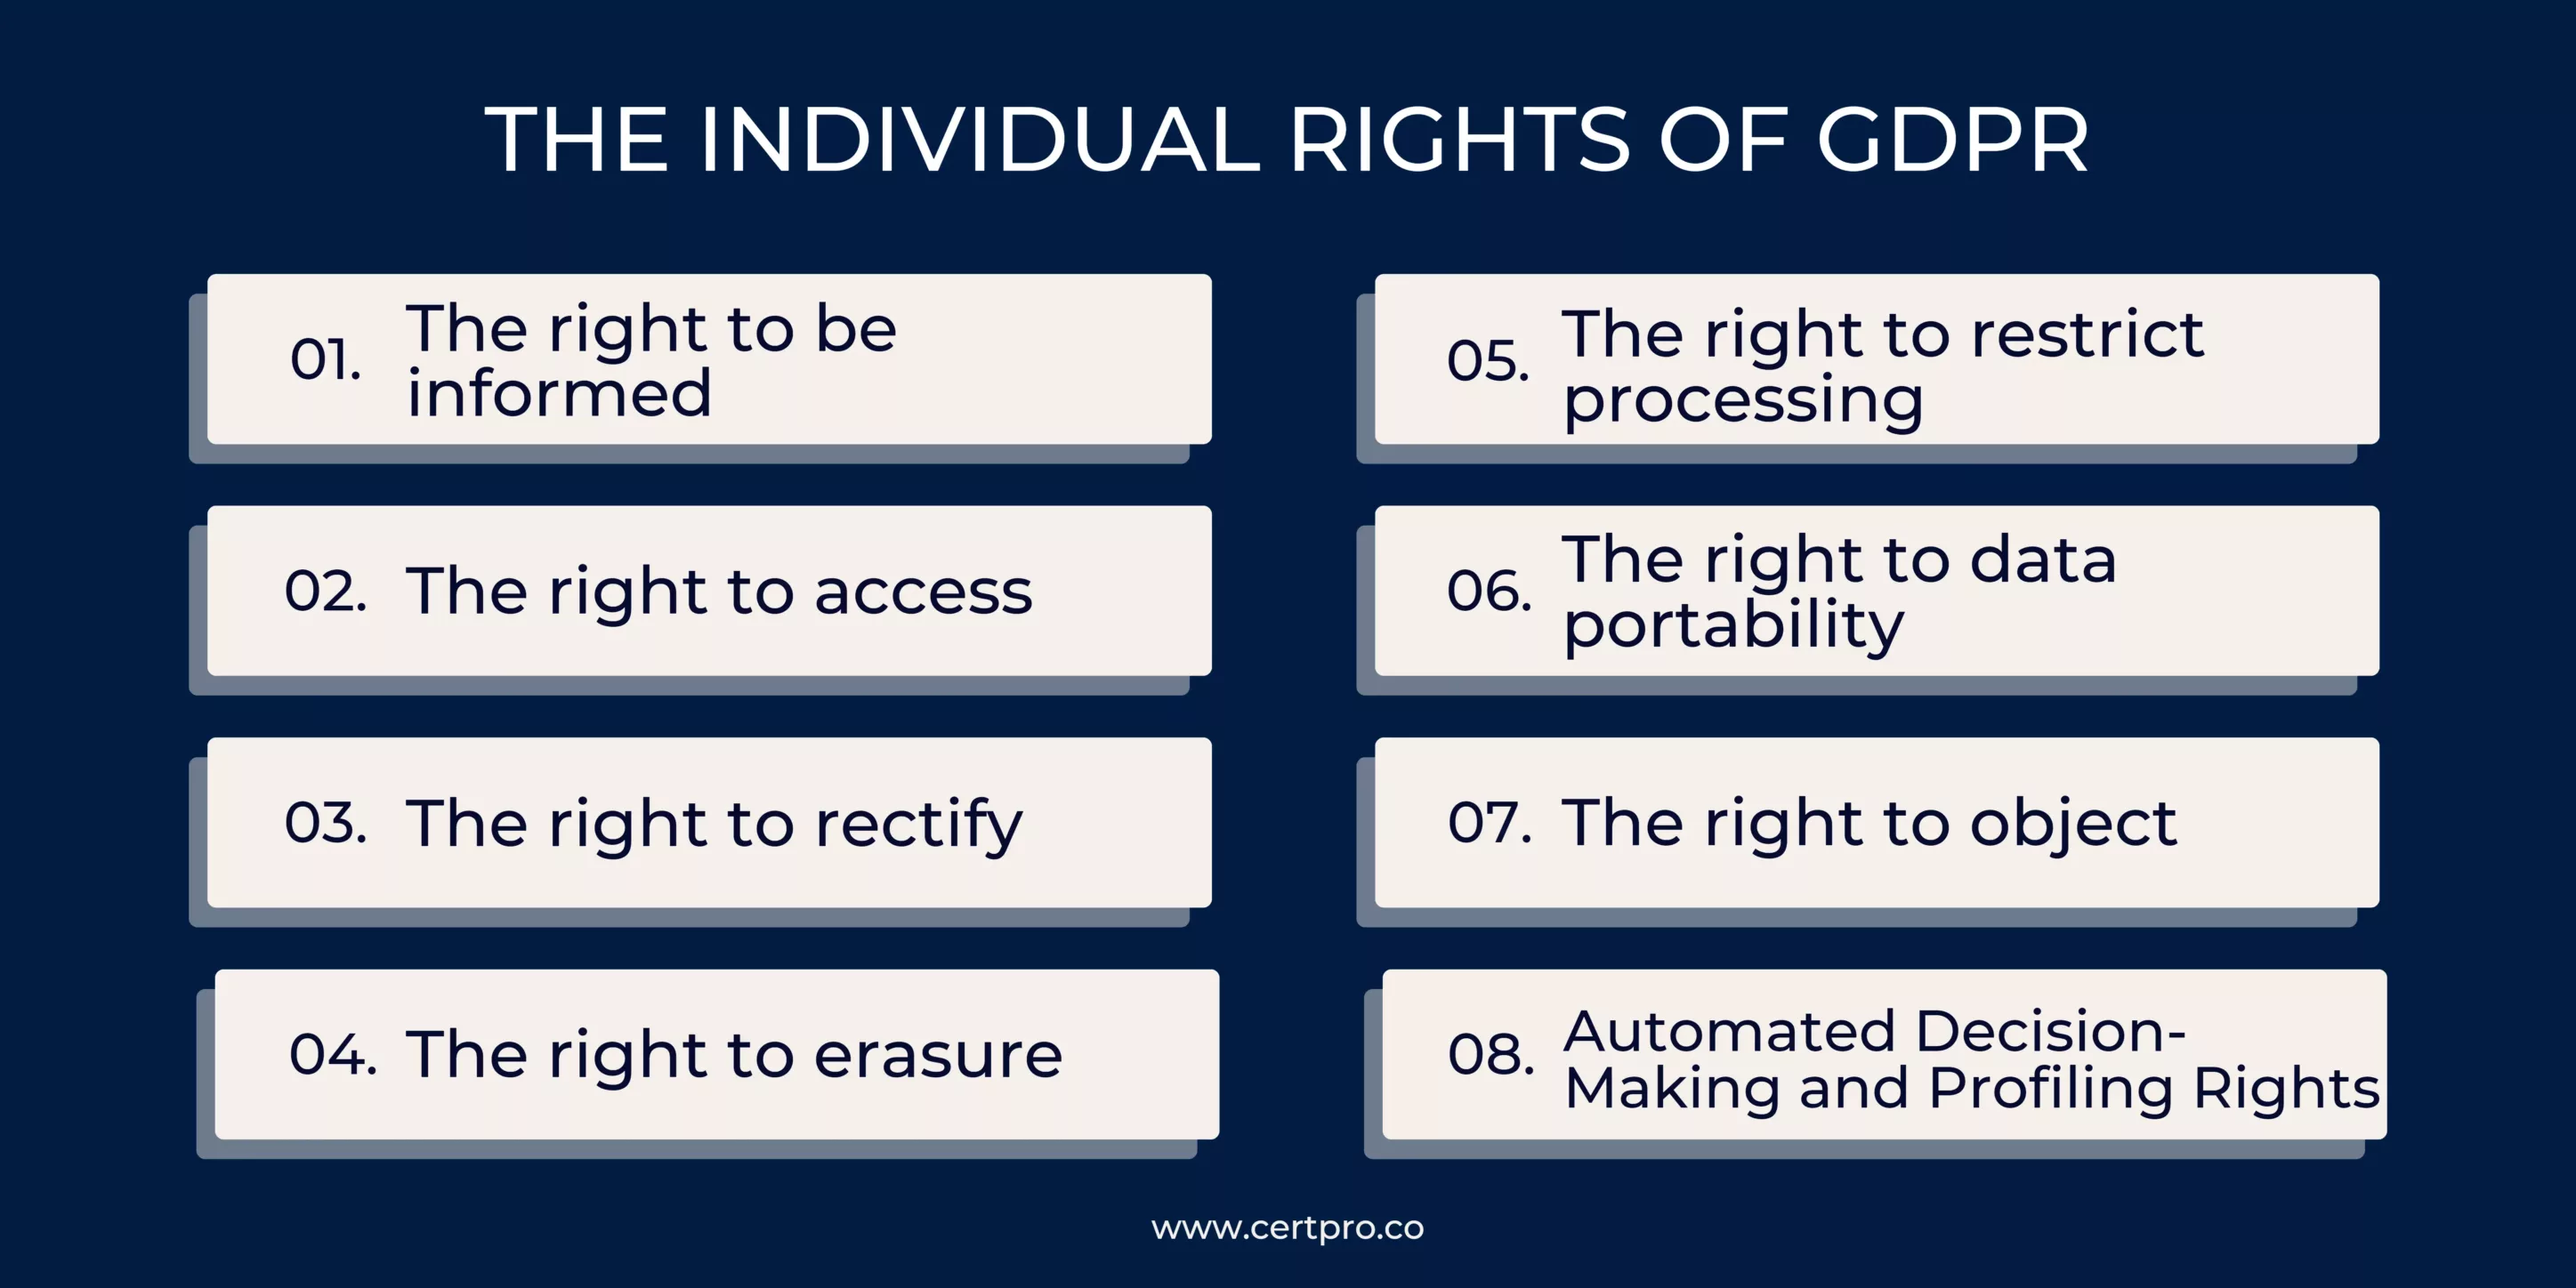 The individual rights of GDPR